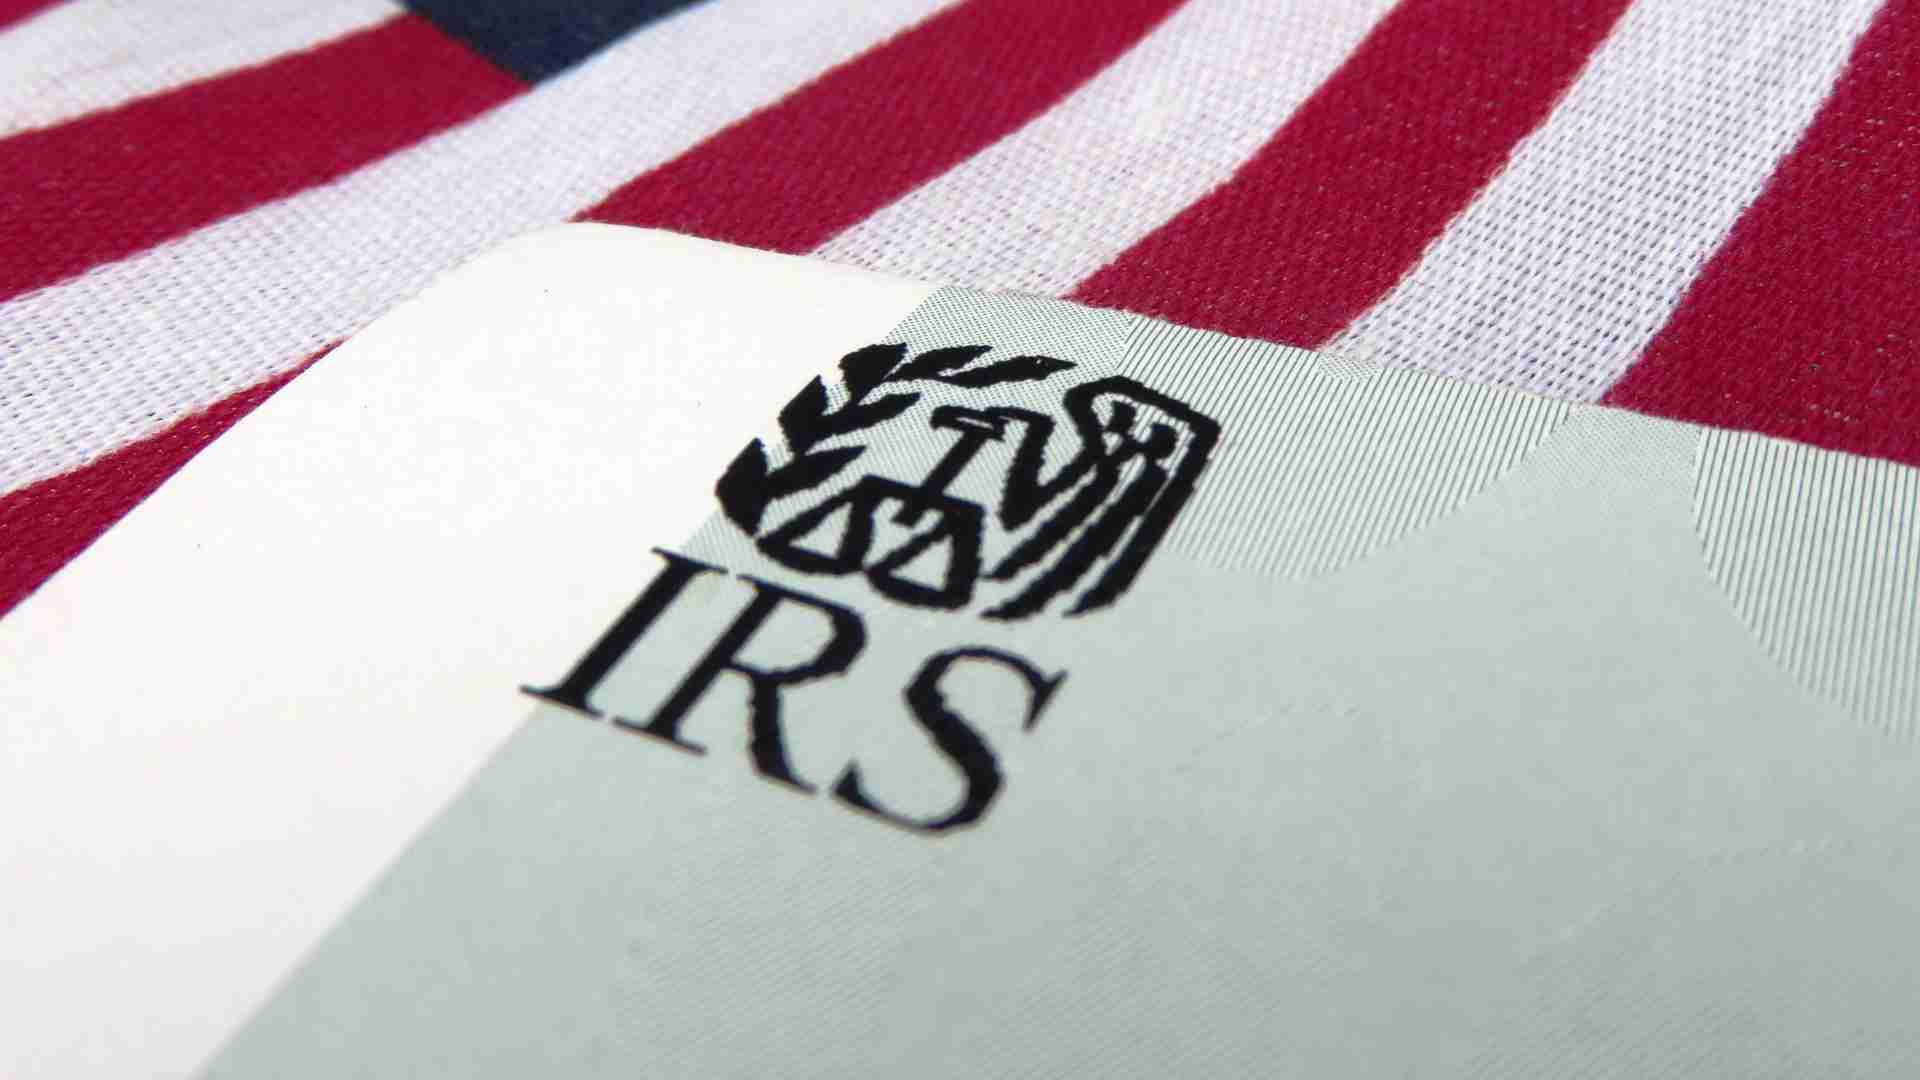 The IRS can still send you a stimulus check if you are eligible and claim it, file now before it is too late